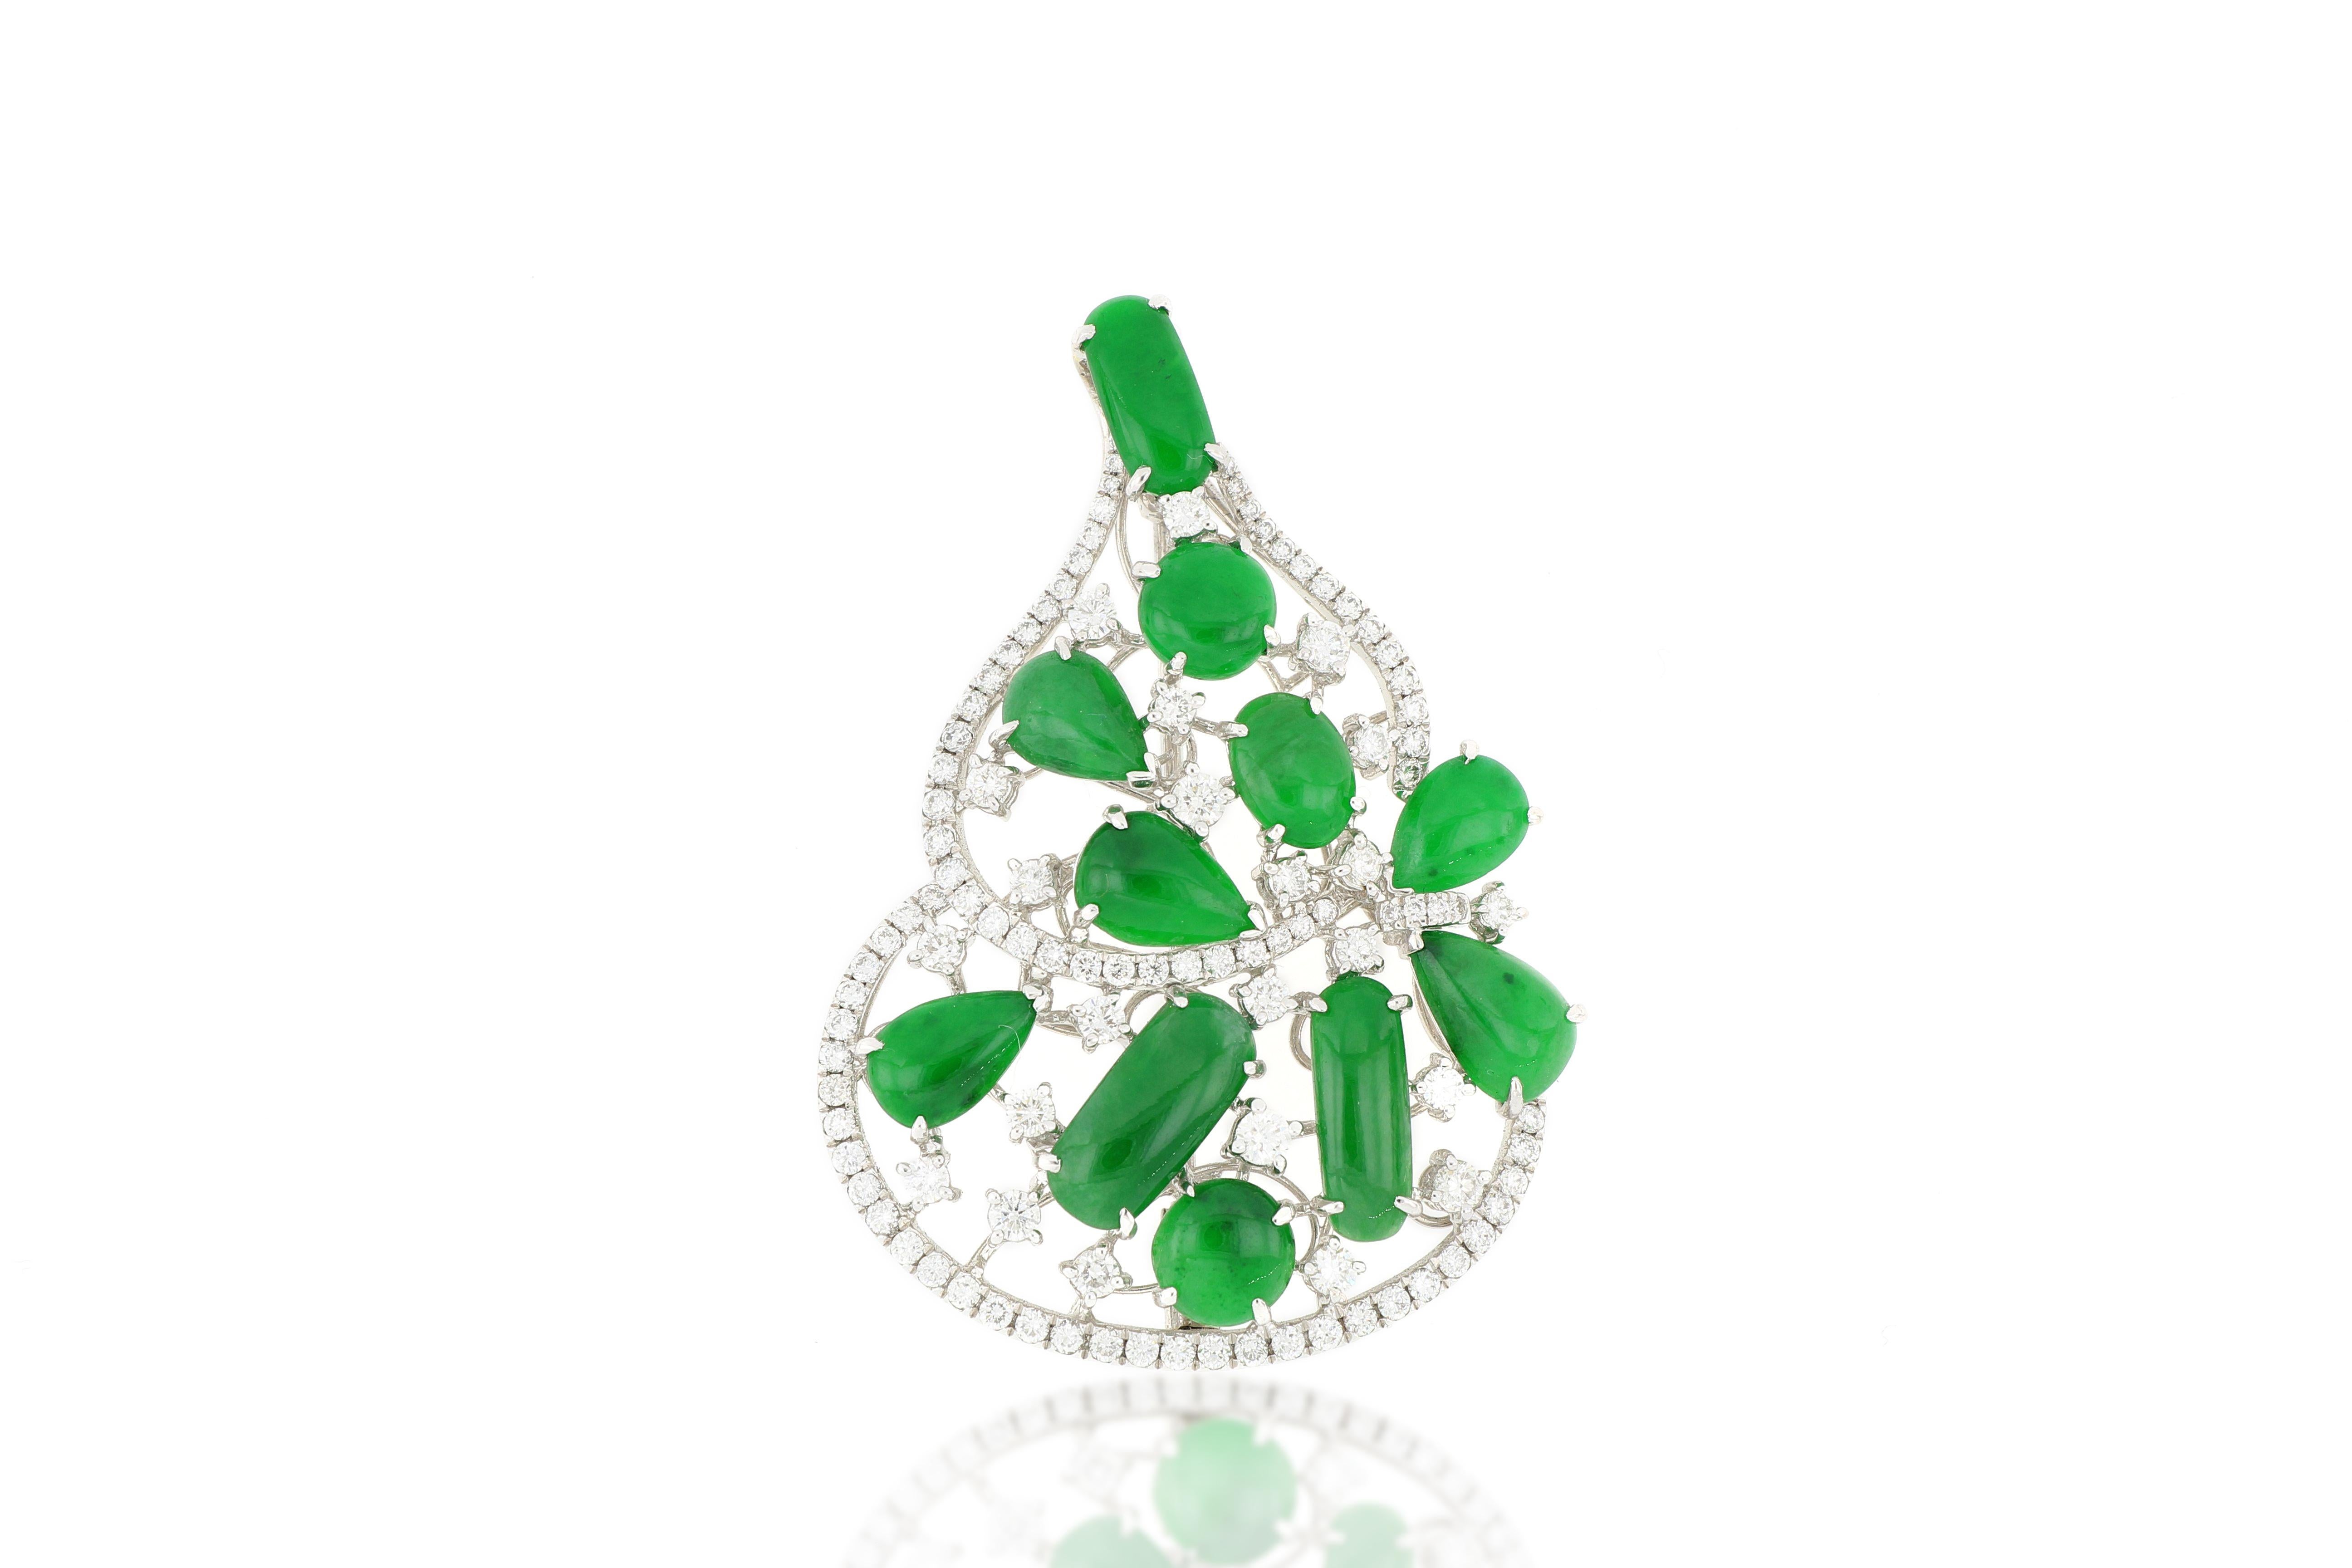 The beautiful pendant is like a wulu in shape. It consists of 11 pieces of jadeite of different shapes and sizes, flanked by brilliant-cut diamonds, weighing 1.50 carats. The jewellery piece is versatile and can also be changed to a